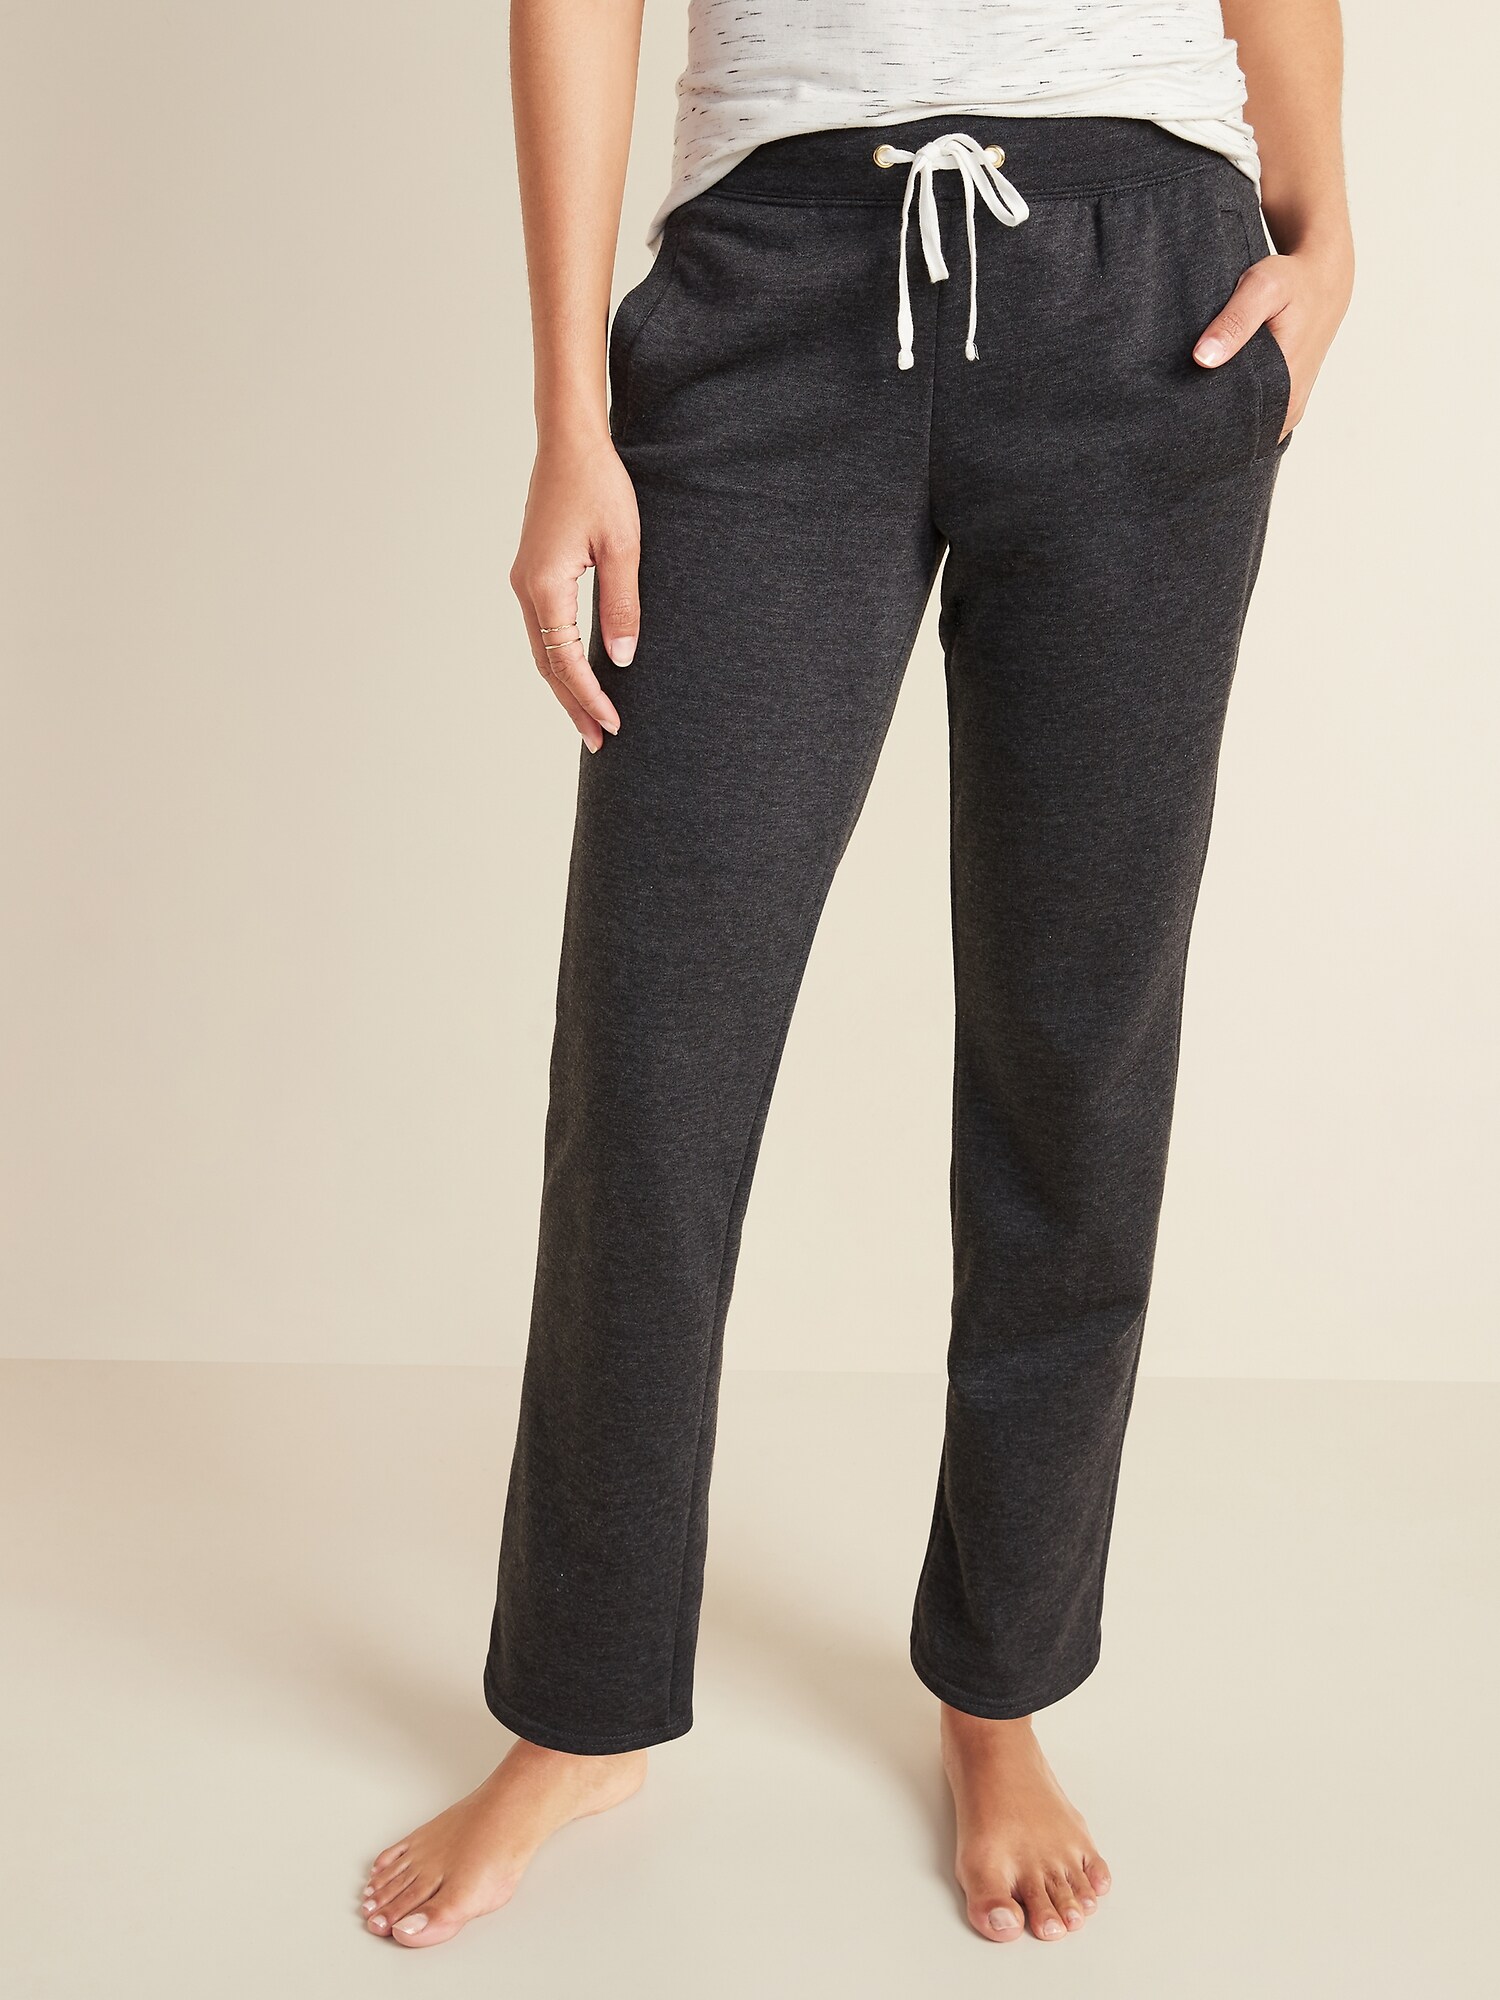 French Terry Straight-Leg Sweatpants for Women | Old Navy